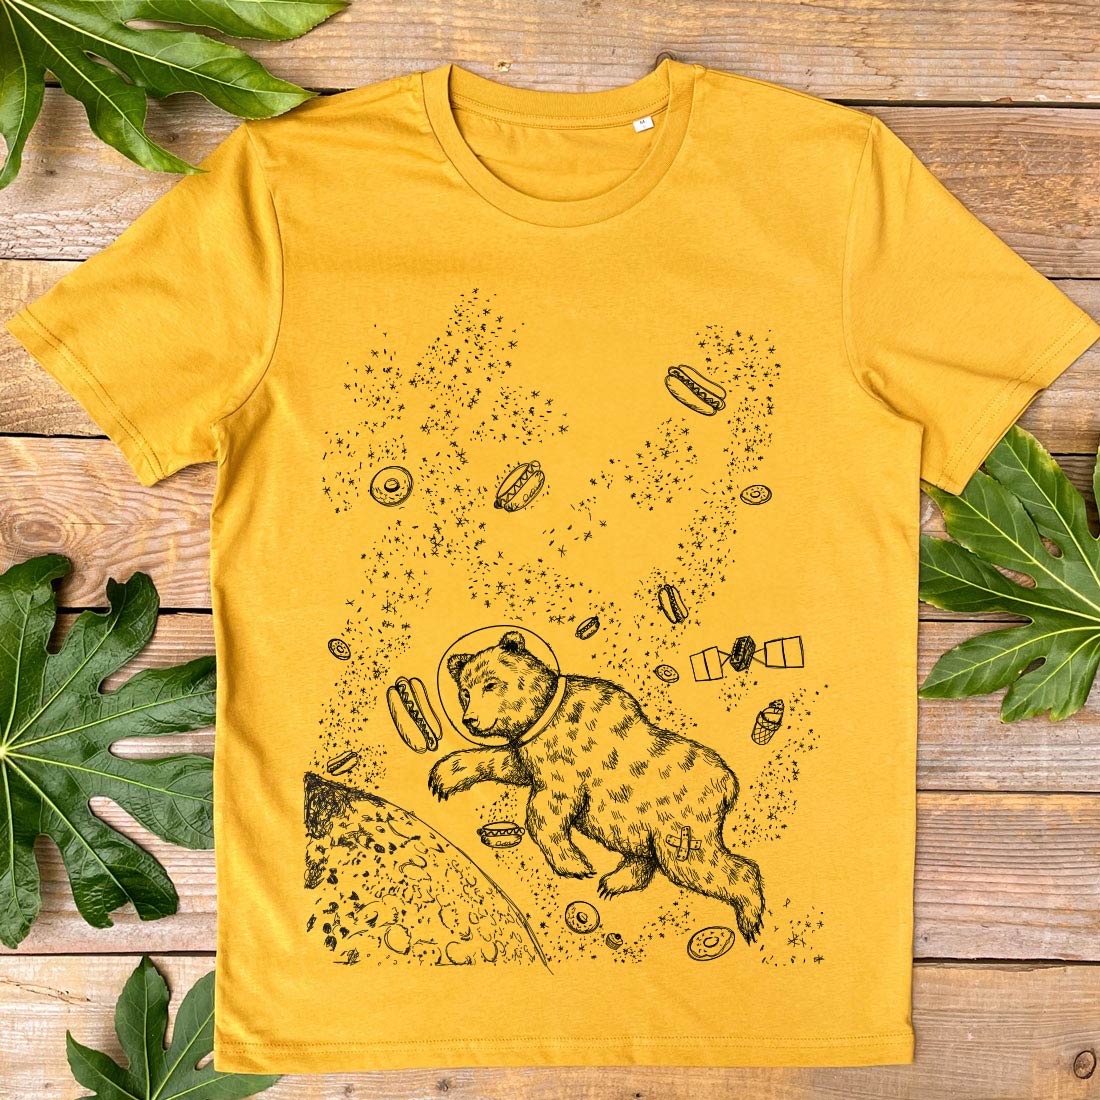 mustard tshirt with bear and hot dogs in space